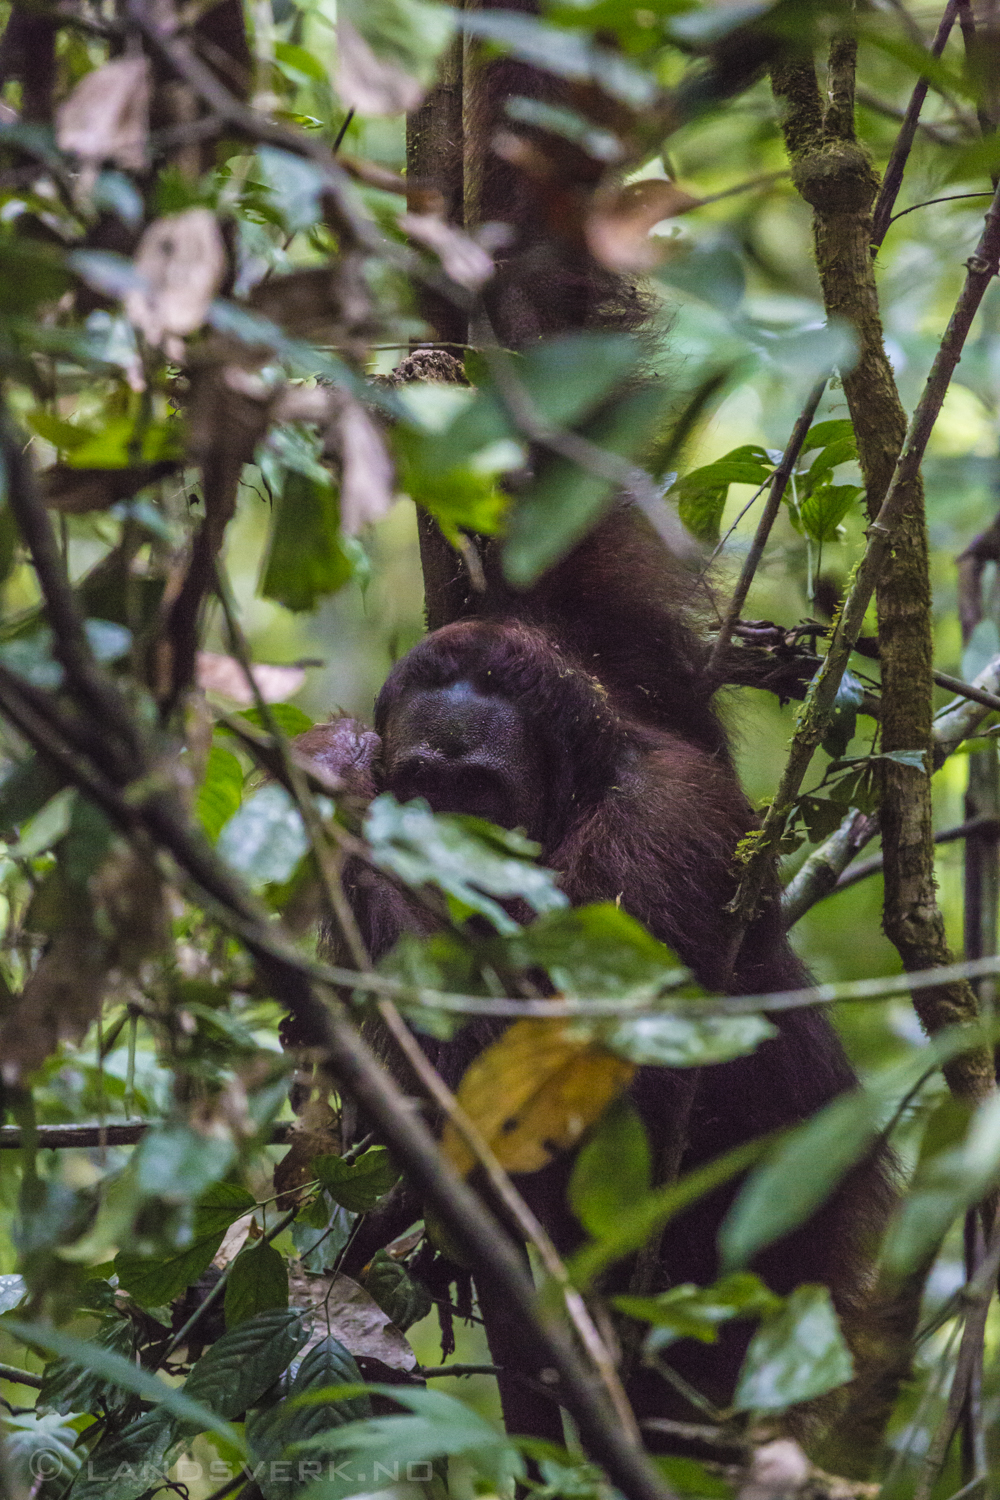 The only close-up I got of a wild Bornean orangutan. A pretty rare sight. This guy was coming down from the trees to escape from some angry bees. Danum Valley, Borneo.

(Canon EOS 5D Mark III / Canon EF 70-200mm f/2.8 L IS II USM / Canon 2x EF Extender III)